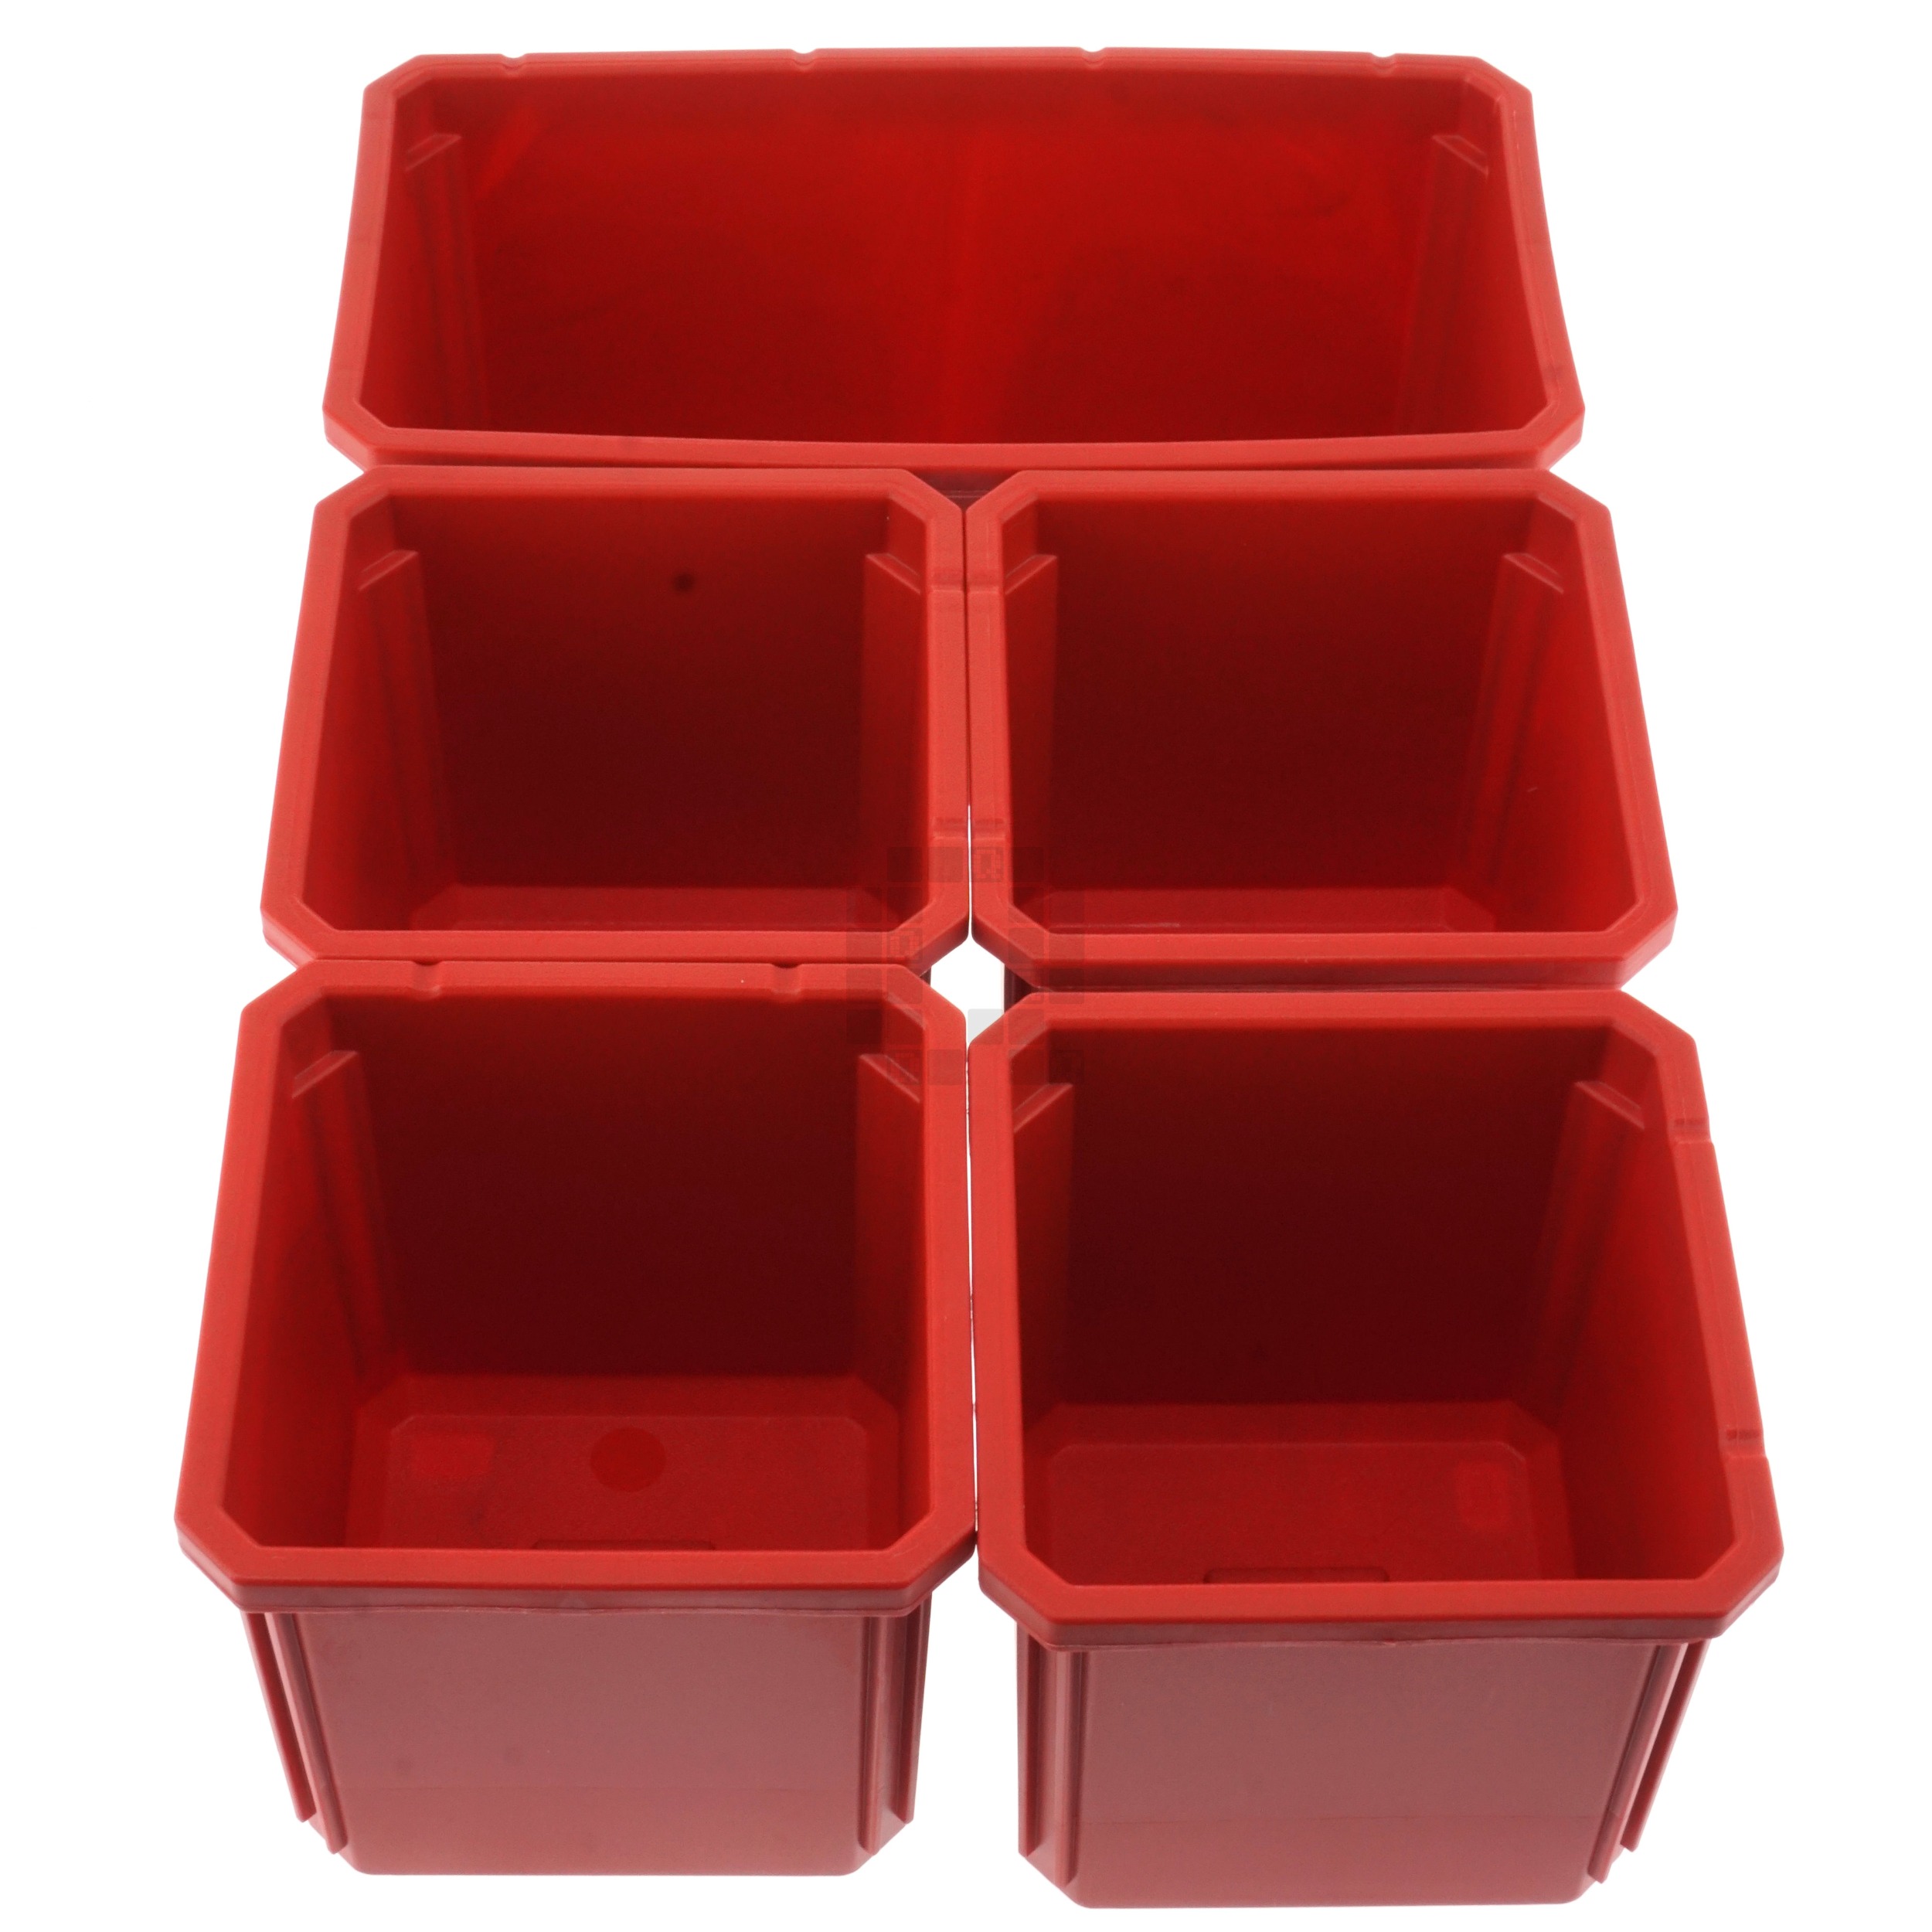 Milwaukee 31-01-0501 PACKOUT Removeable Bin Kit, 4 Small and 1 Big